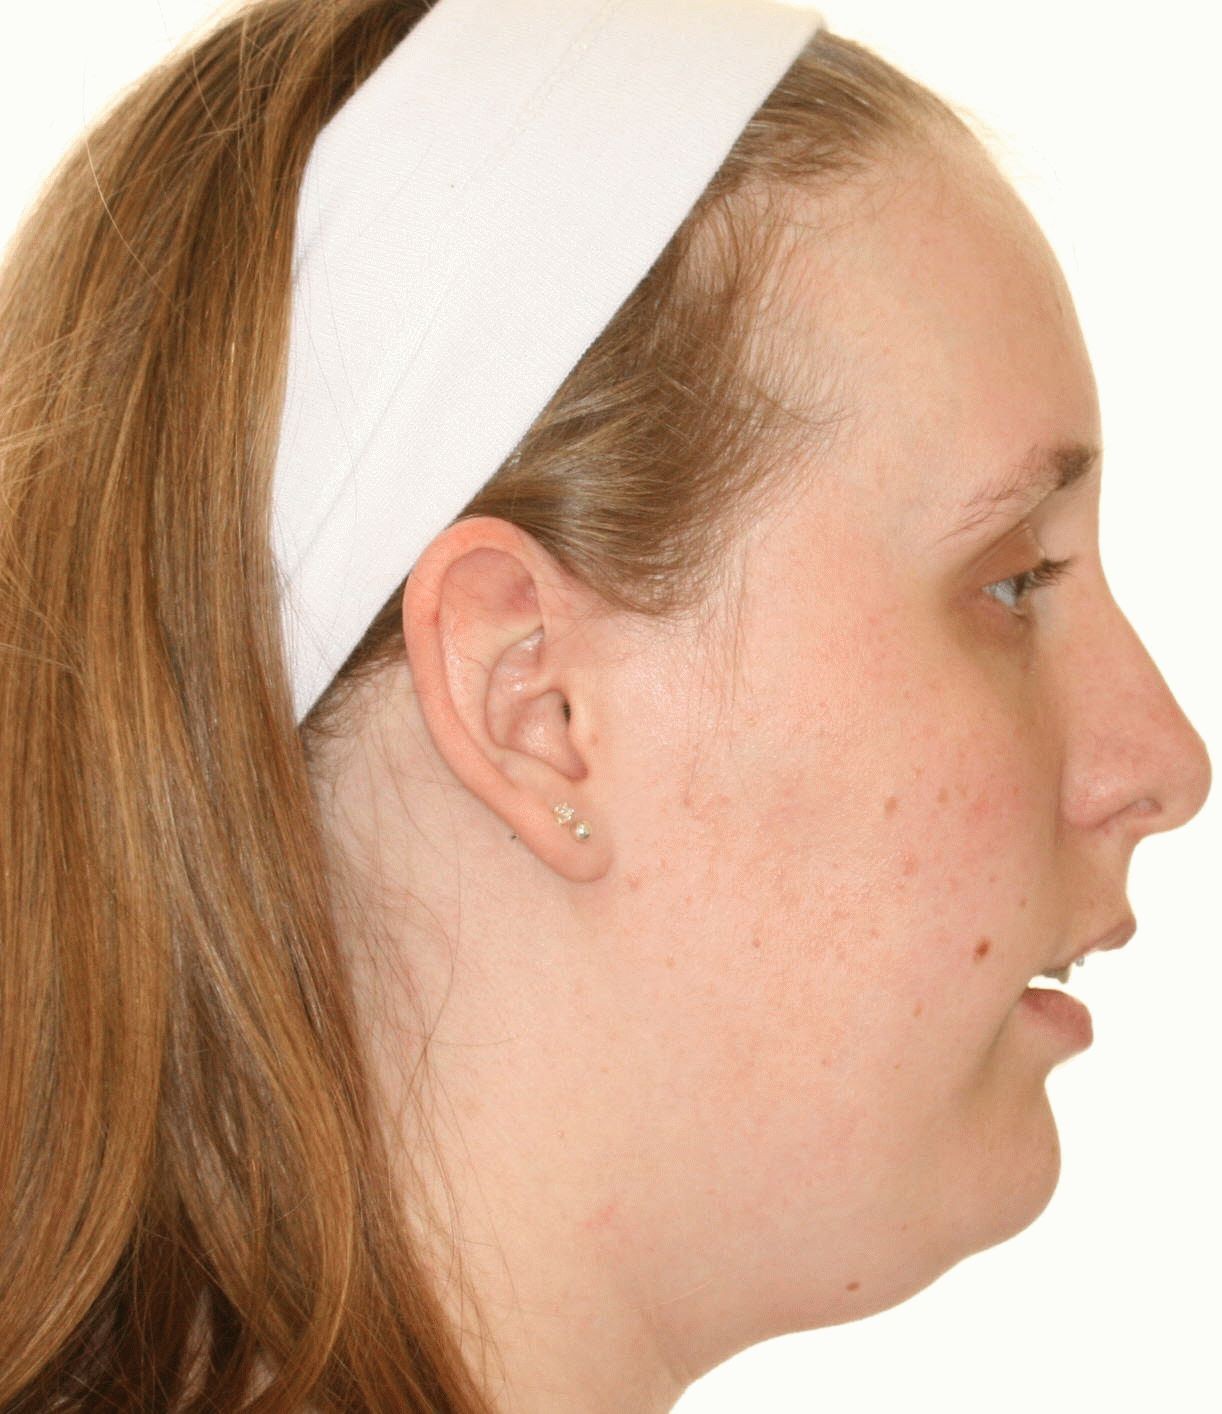 What are some tips for comparing neck surgeons?